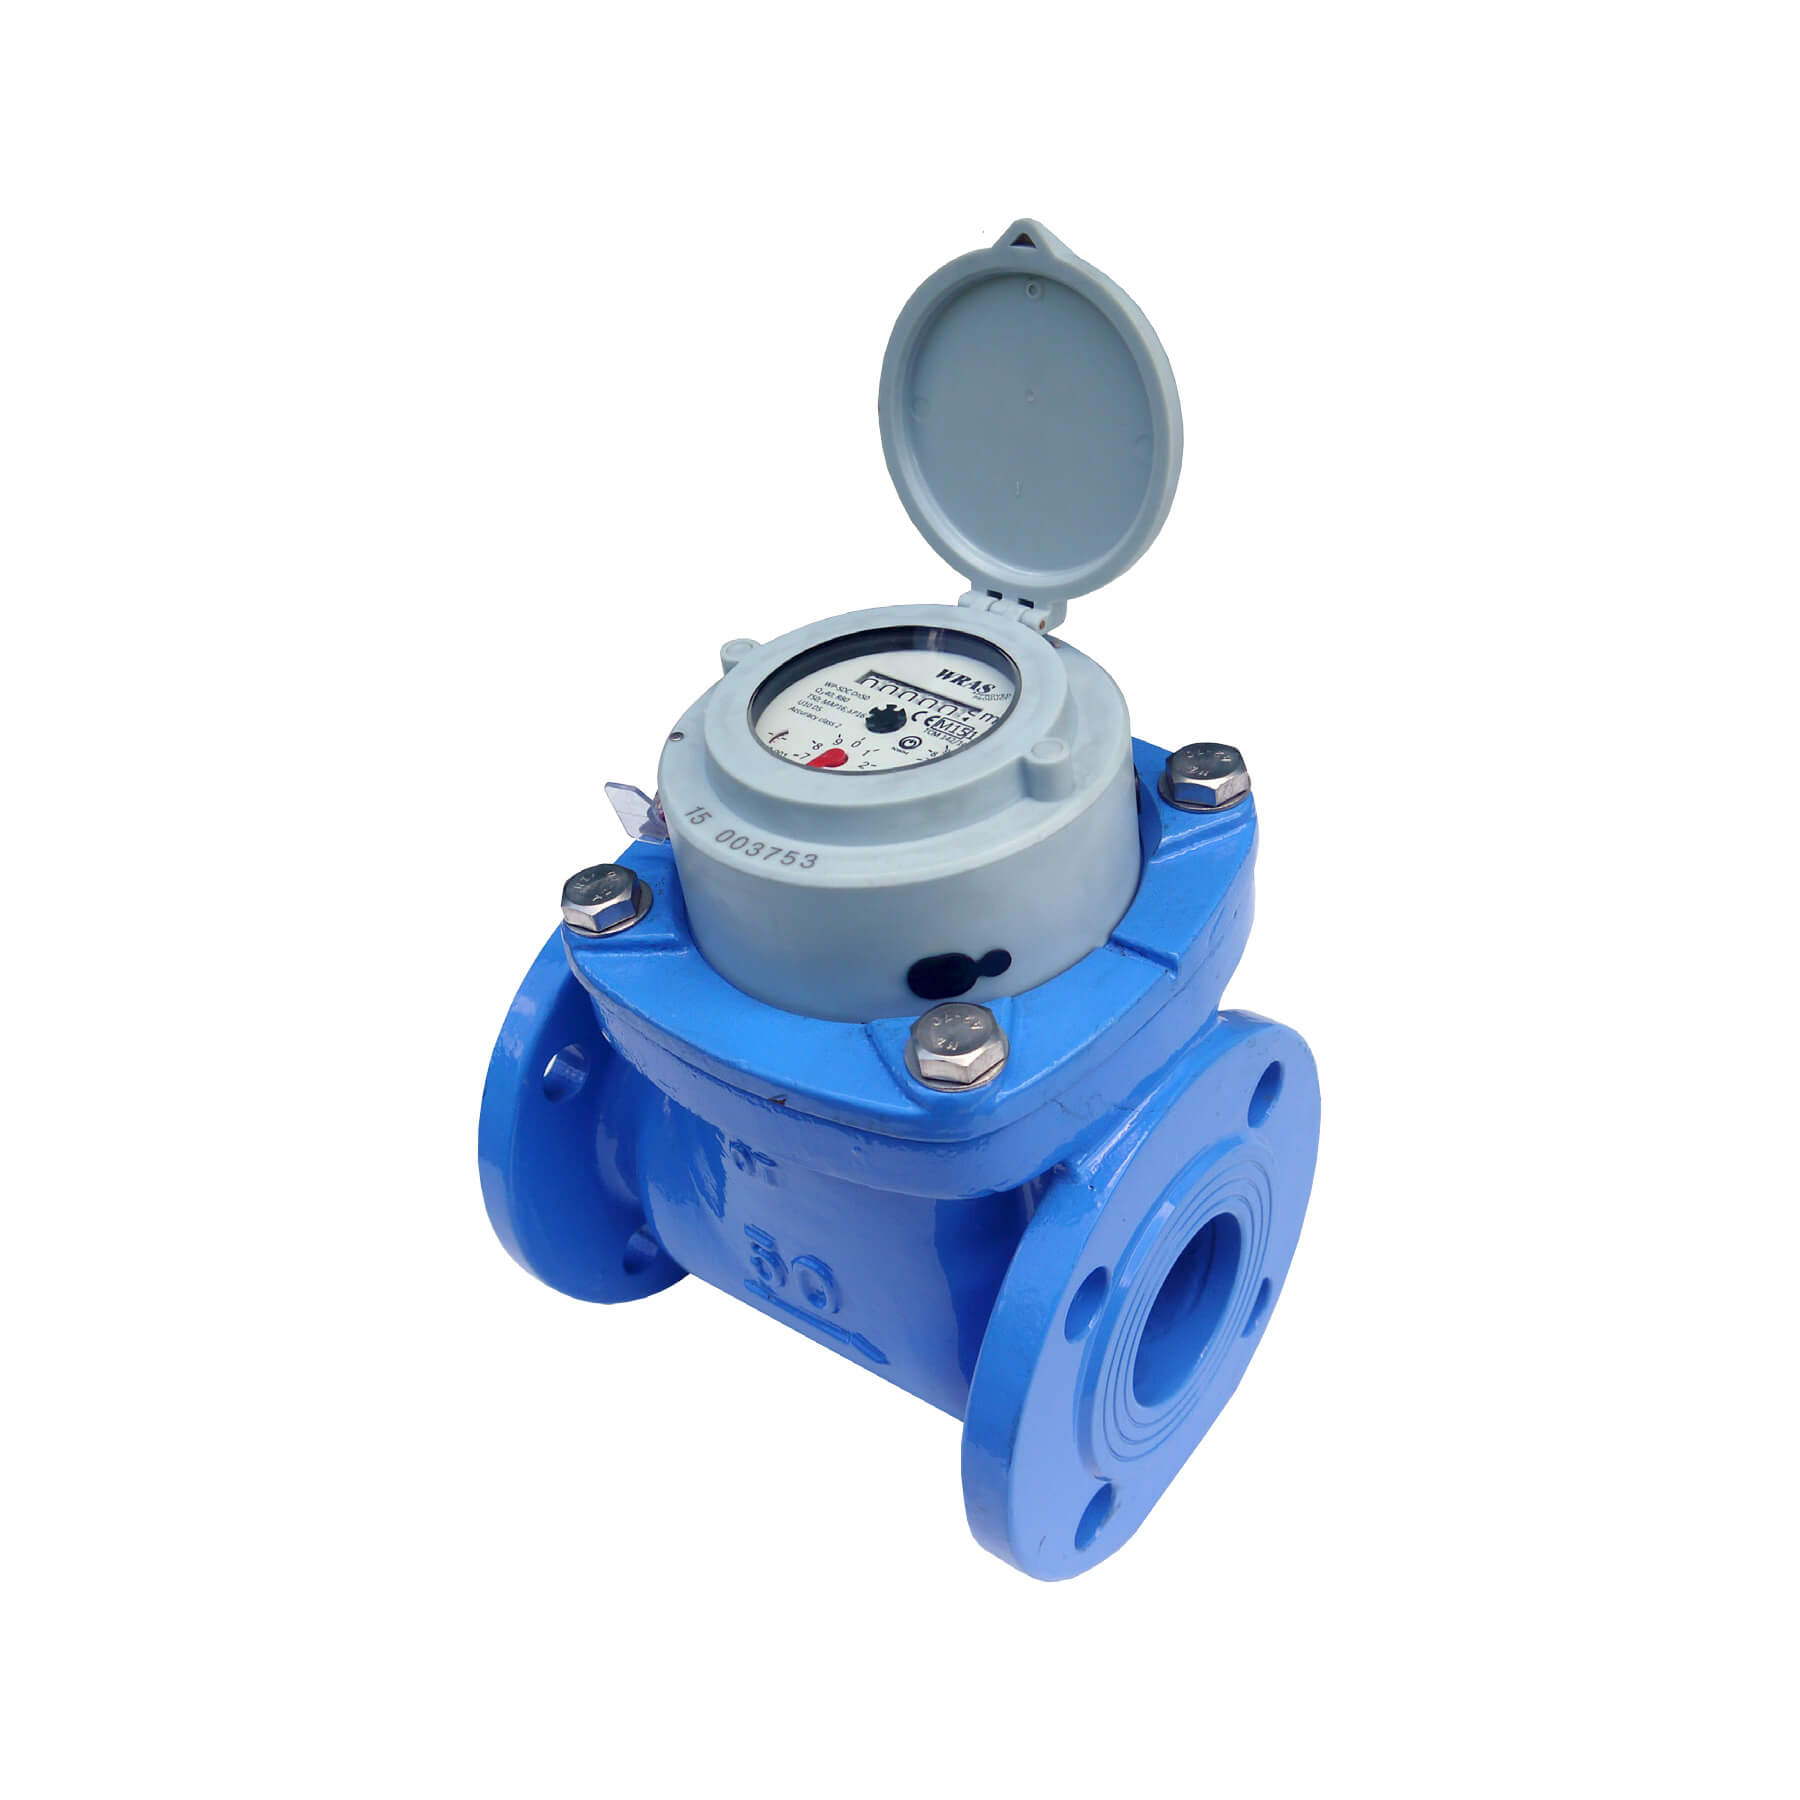 WP- SDC WOLTMANN WATER METER WITH SUPER DRY DIAL